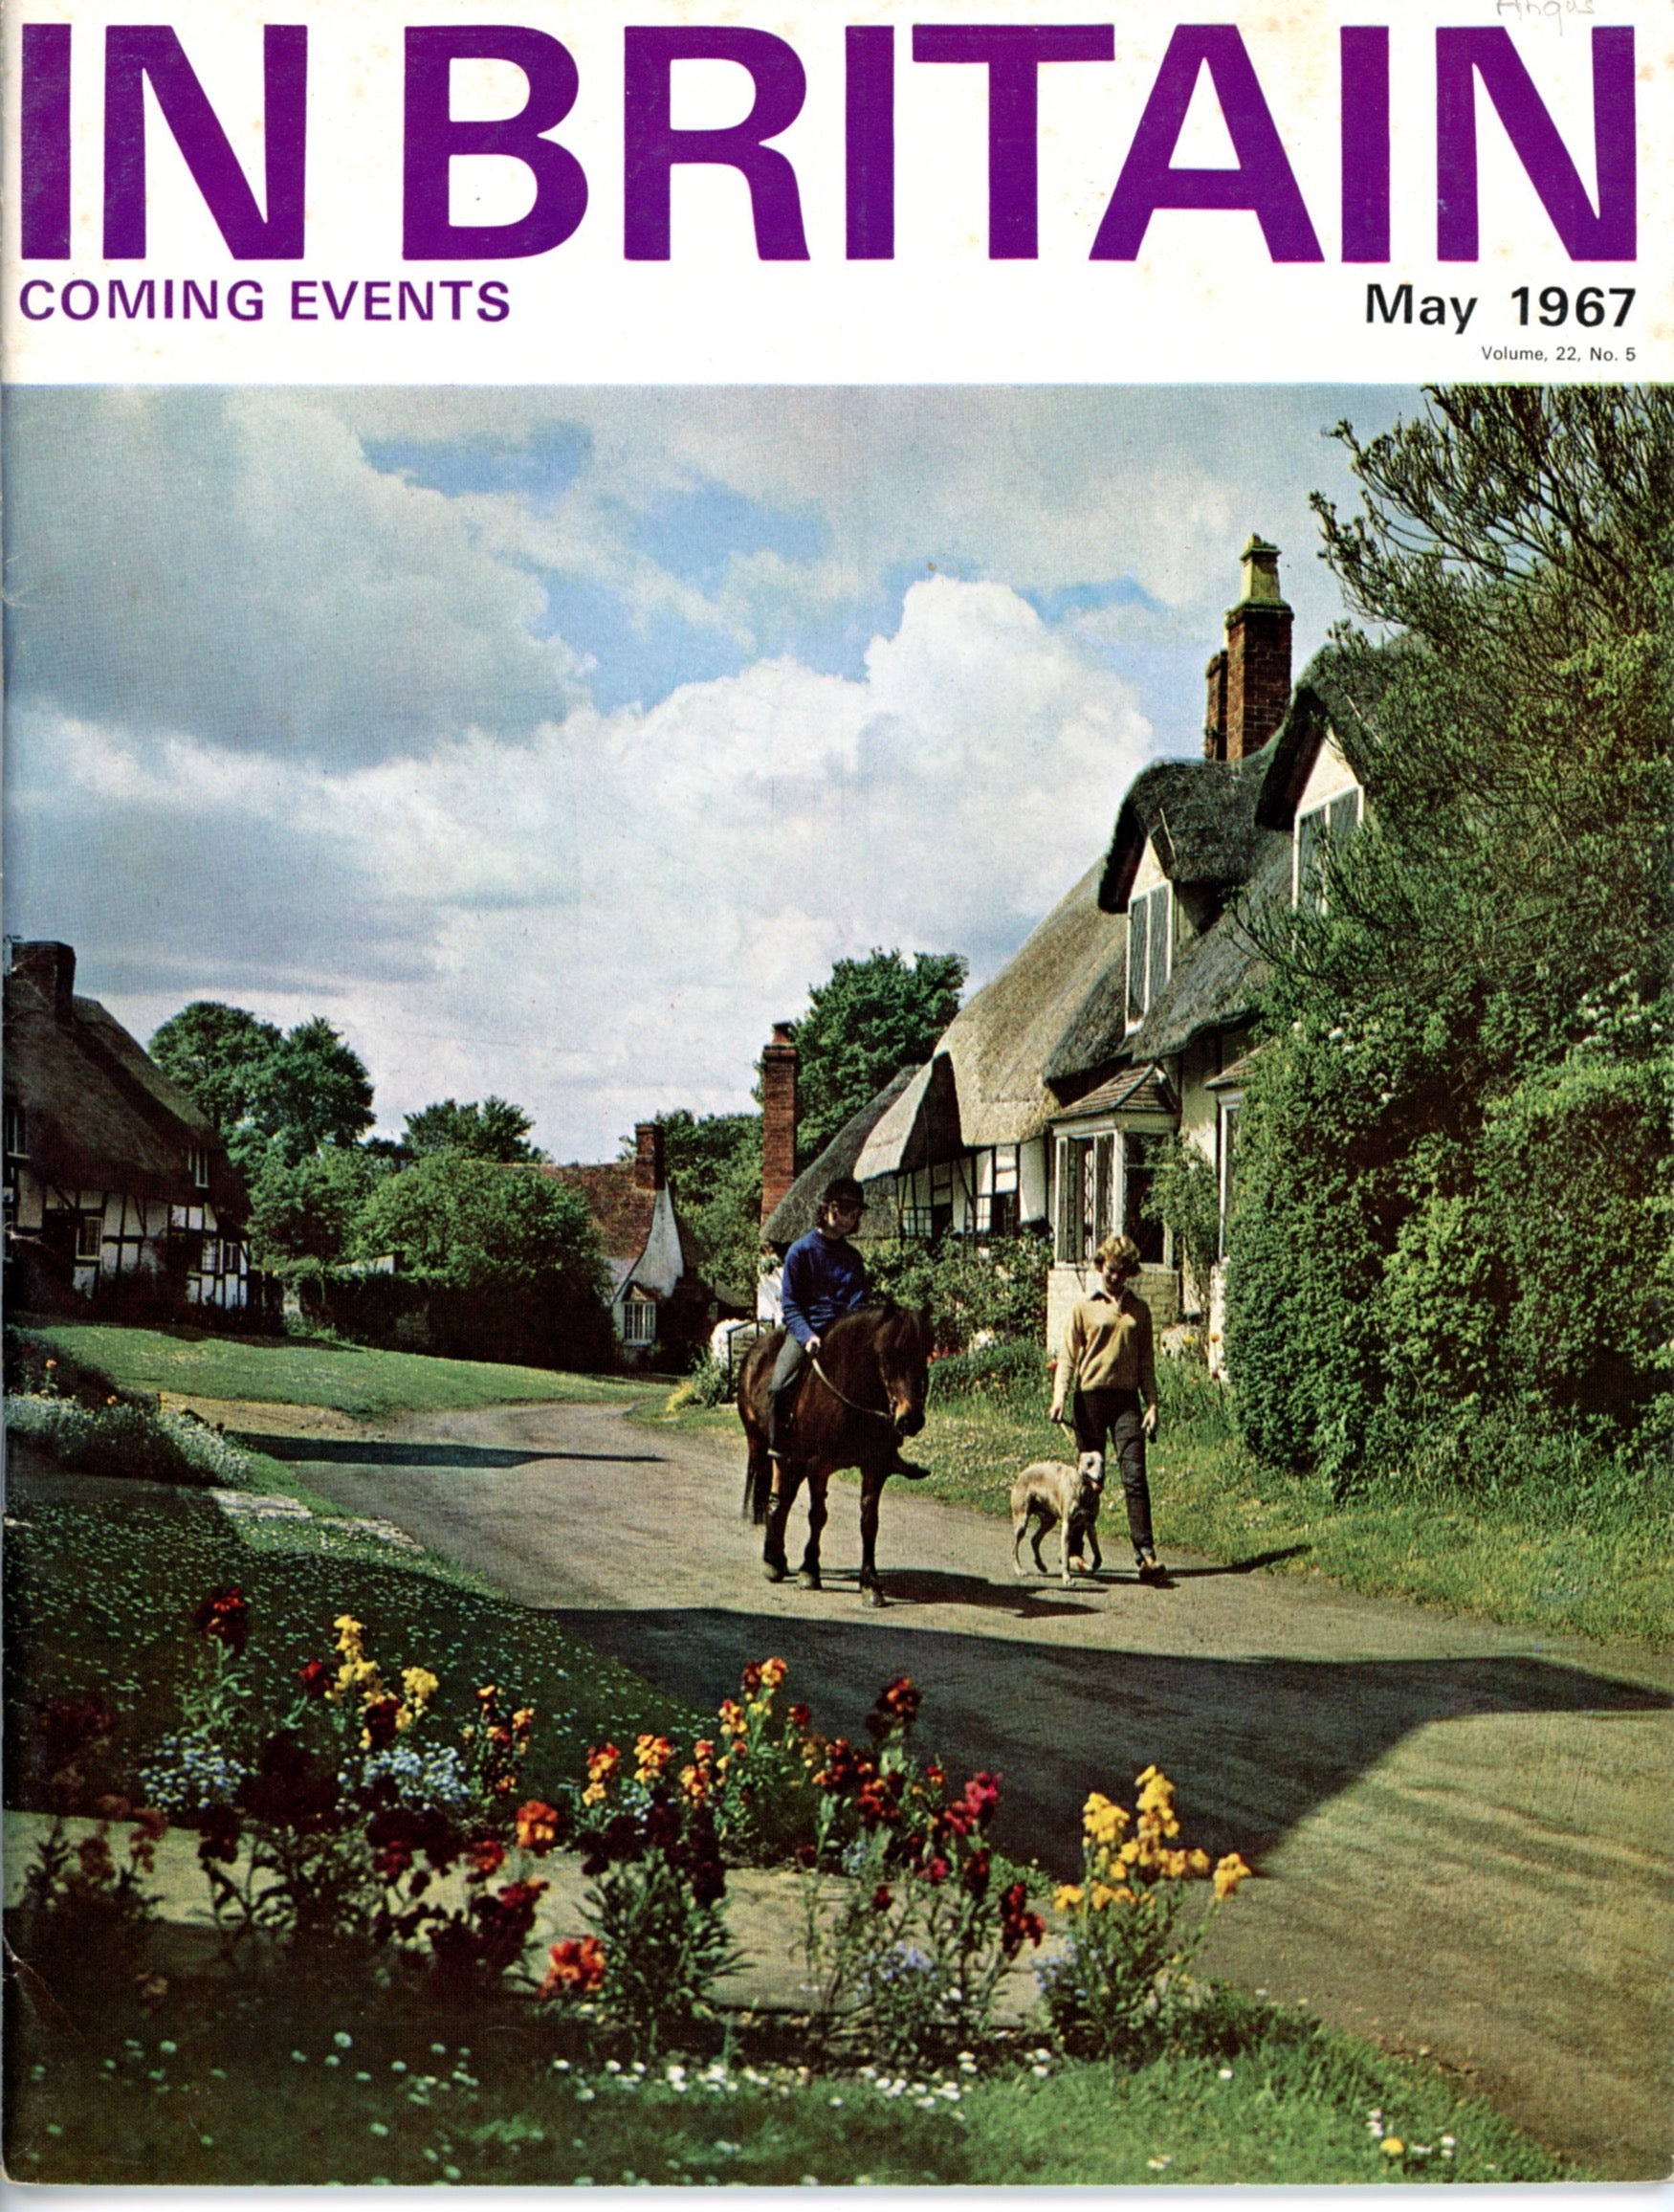 COMING EVENTS IN BRITAIN Vintage Travel Magazines Single Issues © May 1967